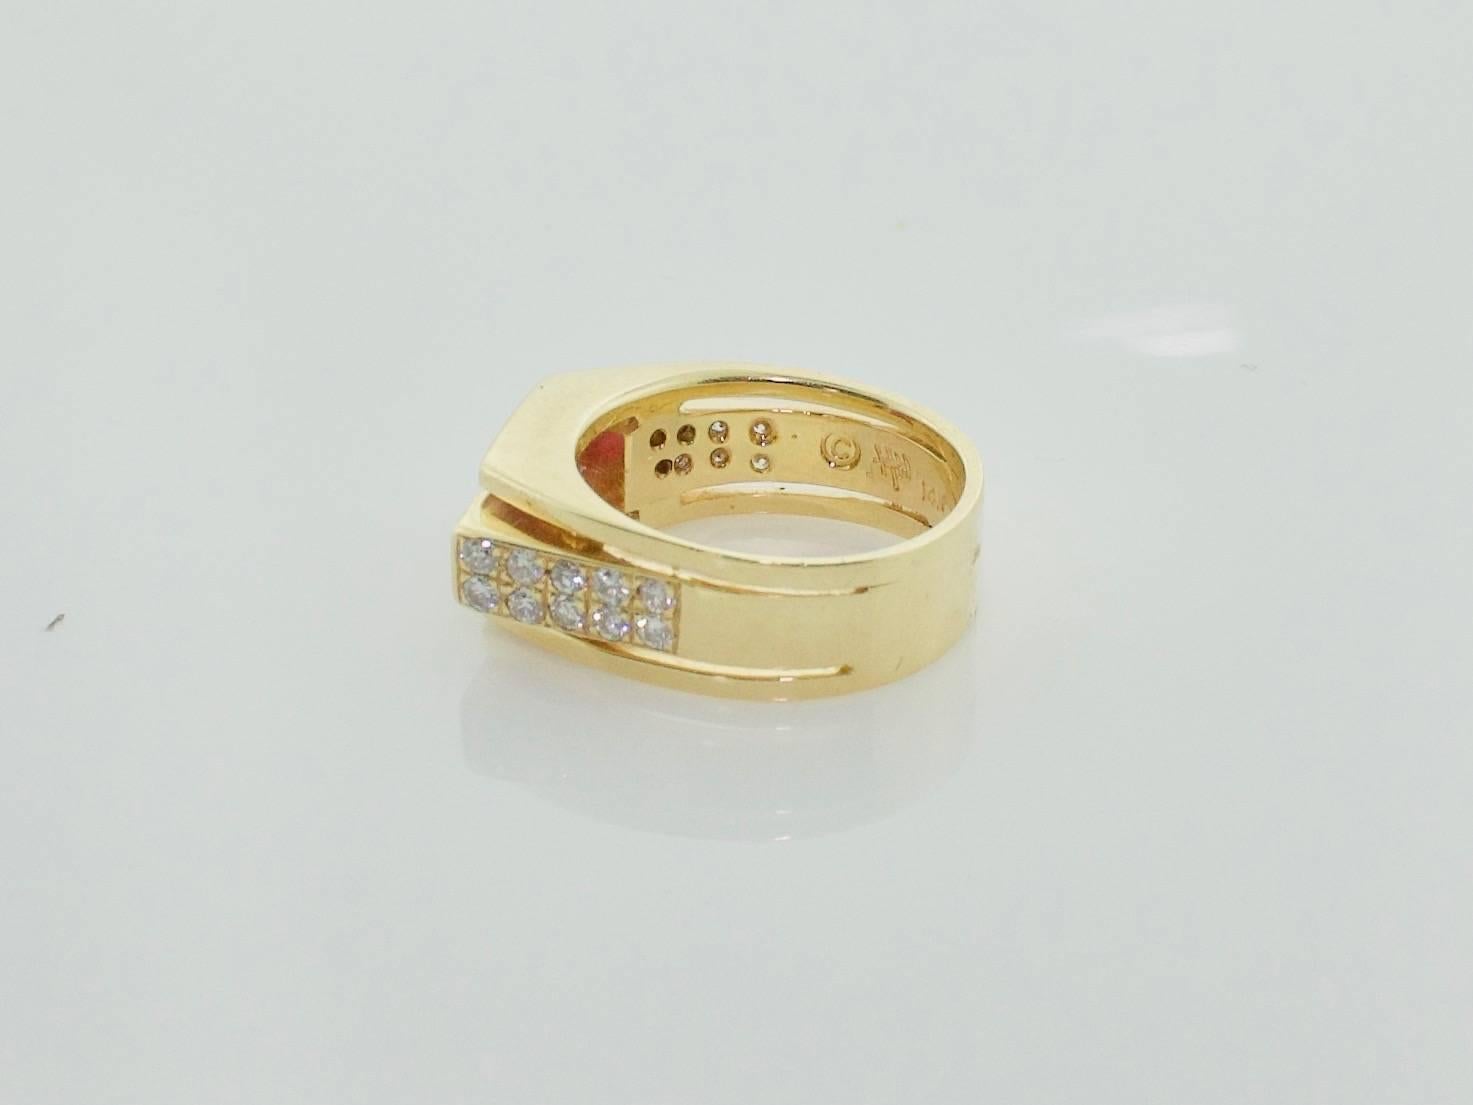 Burma Ruby and Diamond Ring in 14 Karat Yellow Gold In Excellent Condition For Sale In Wailea, HI